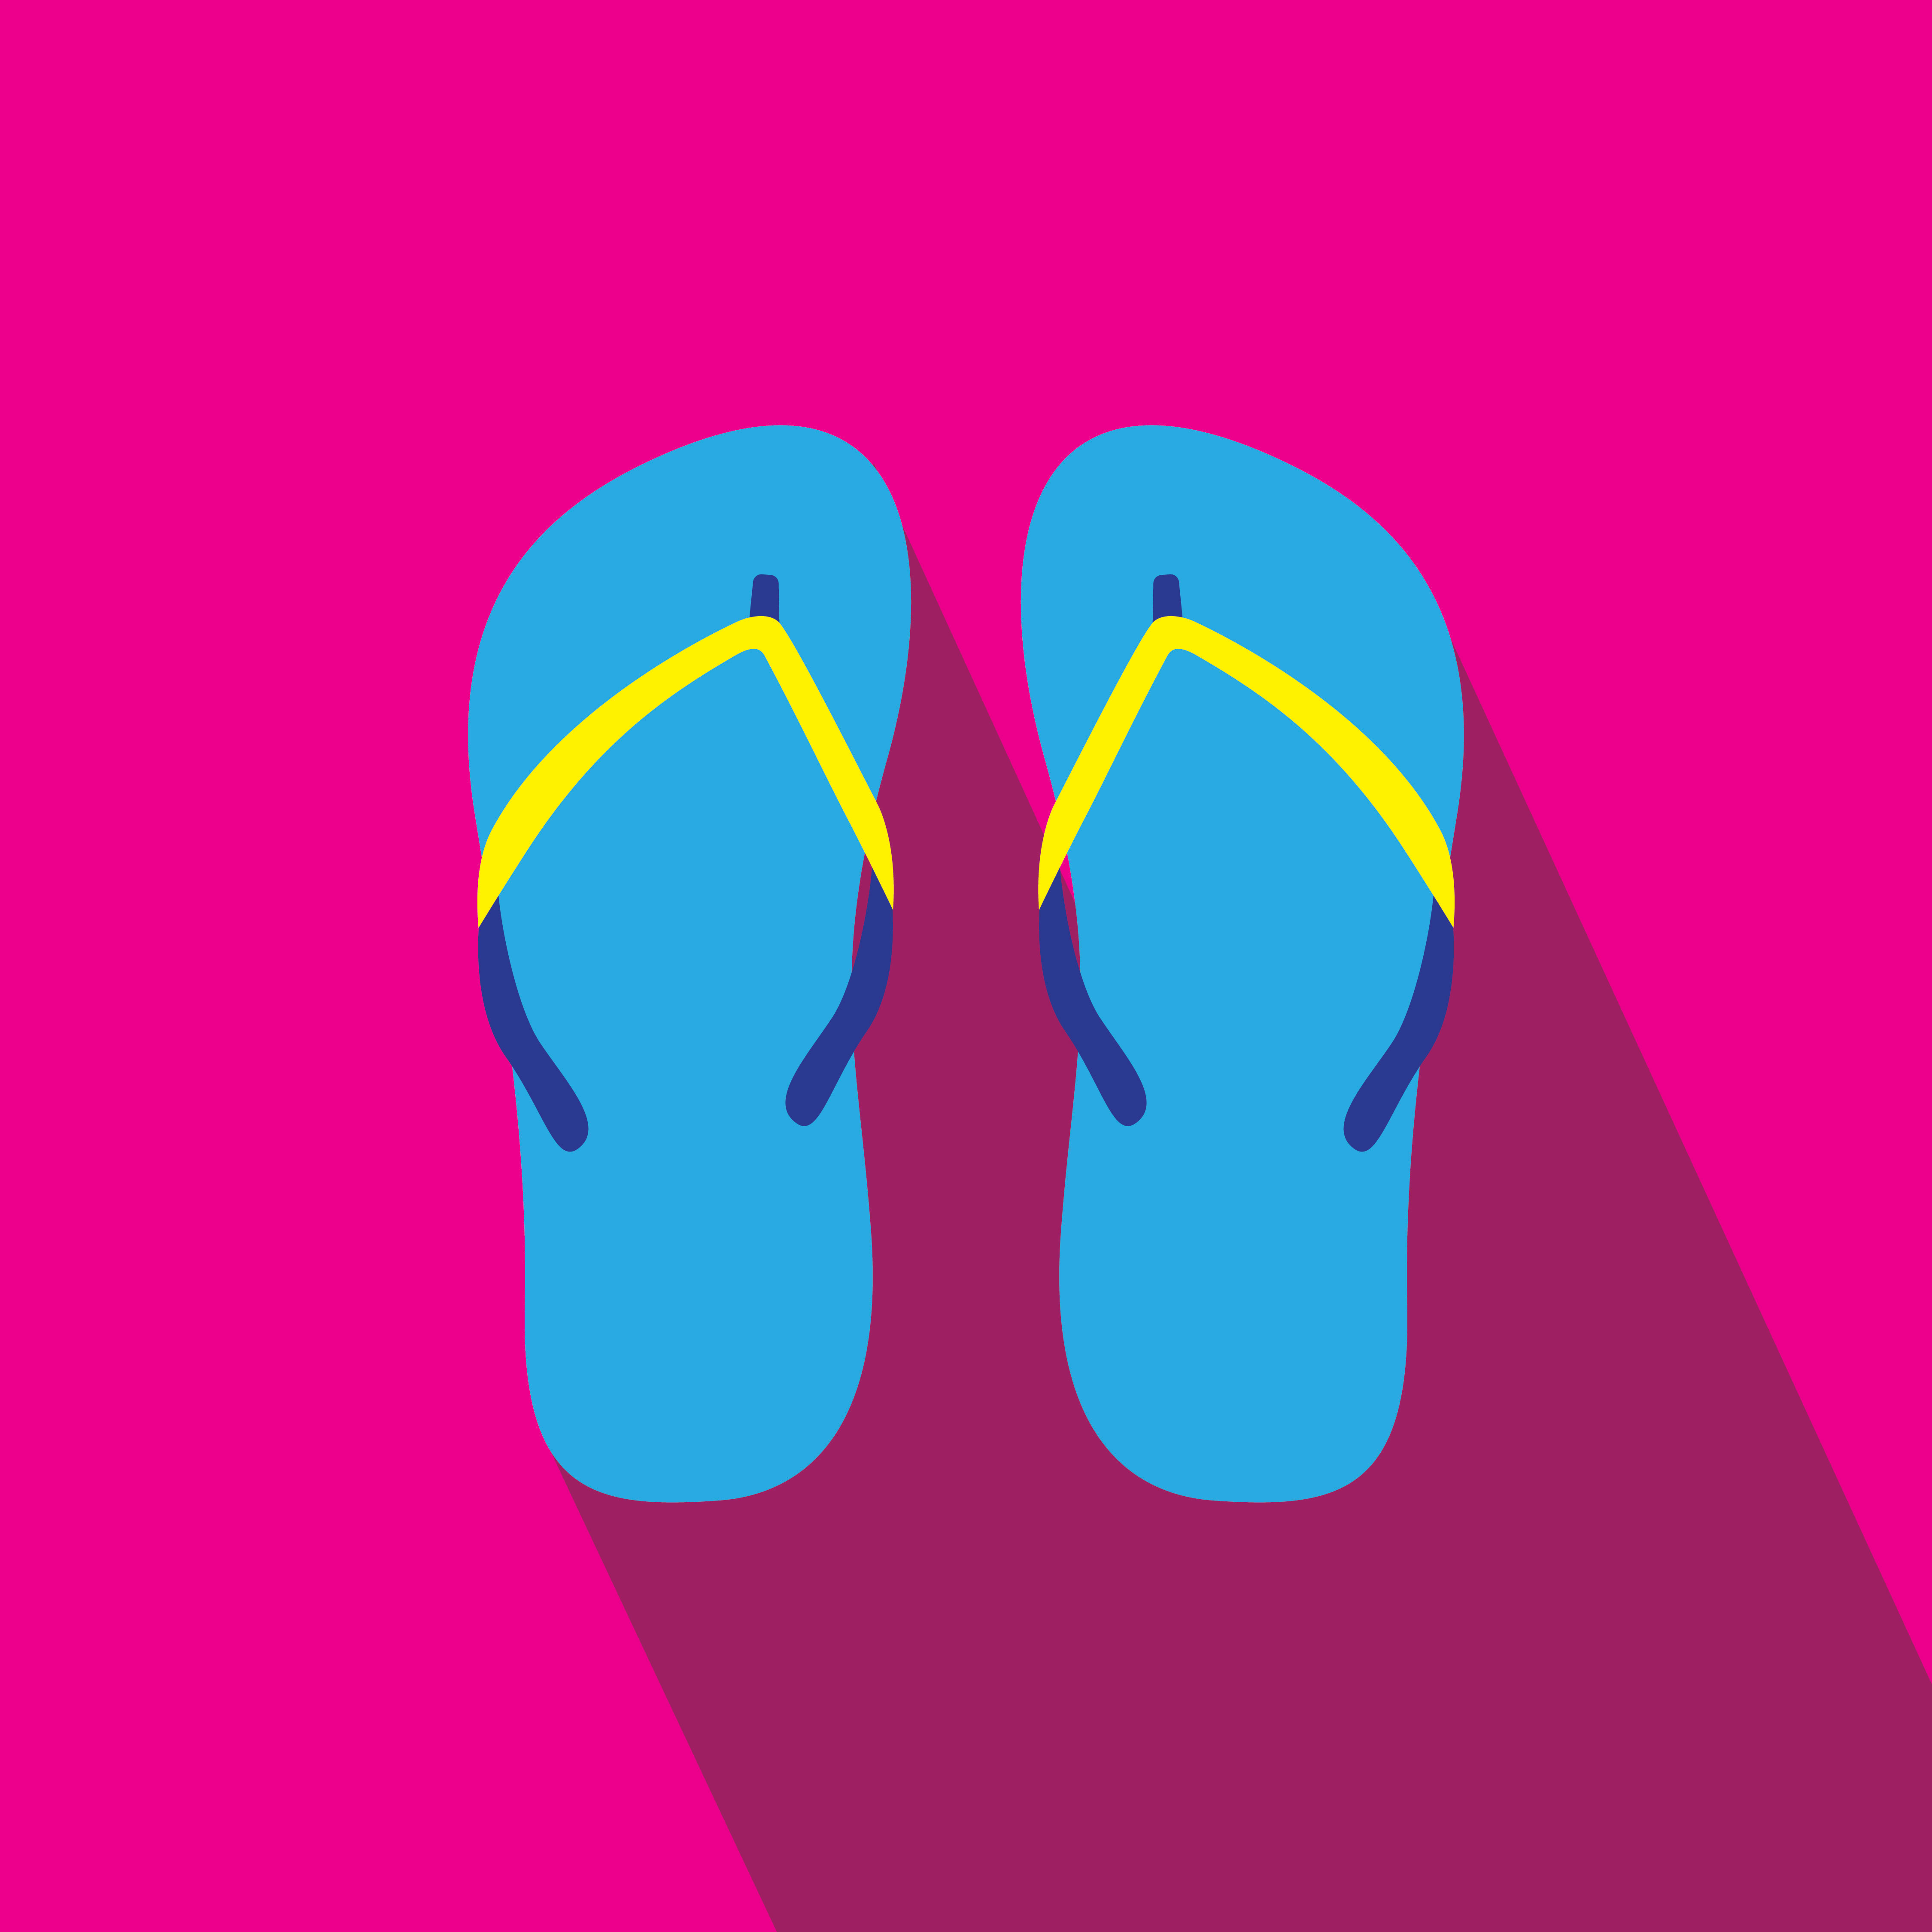 Blue and yellow flip flops on pink background illustration